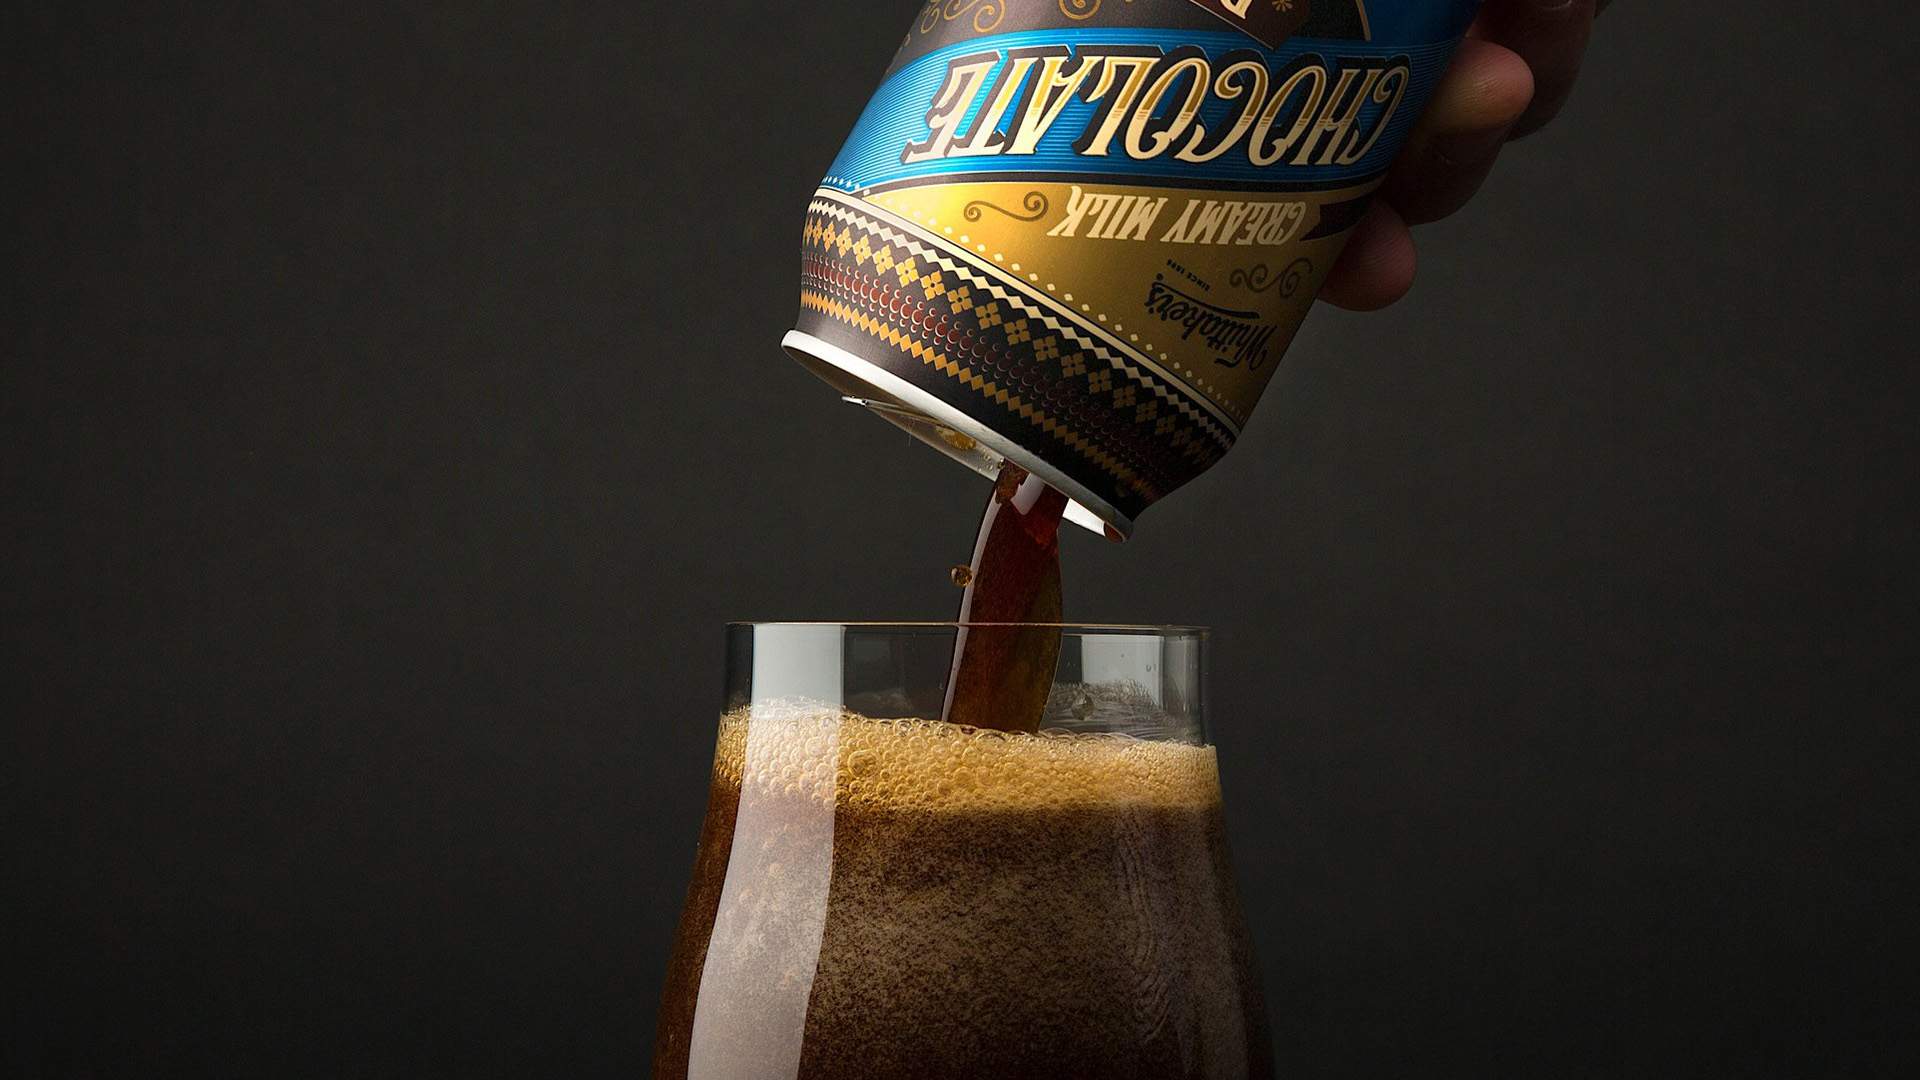 Chocolate Milk Was Not Enough, Whittaker's Is Now Making Chocolate Beer Too